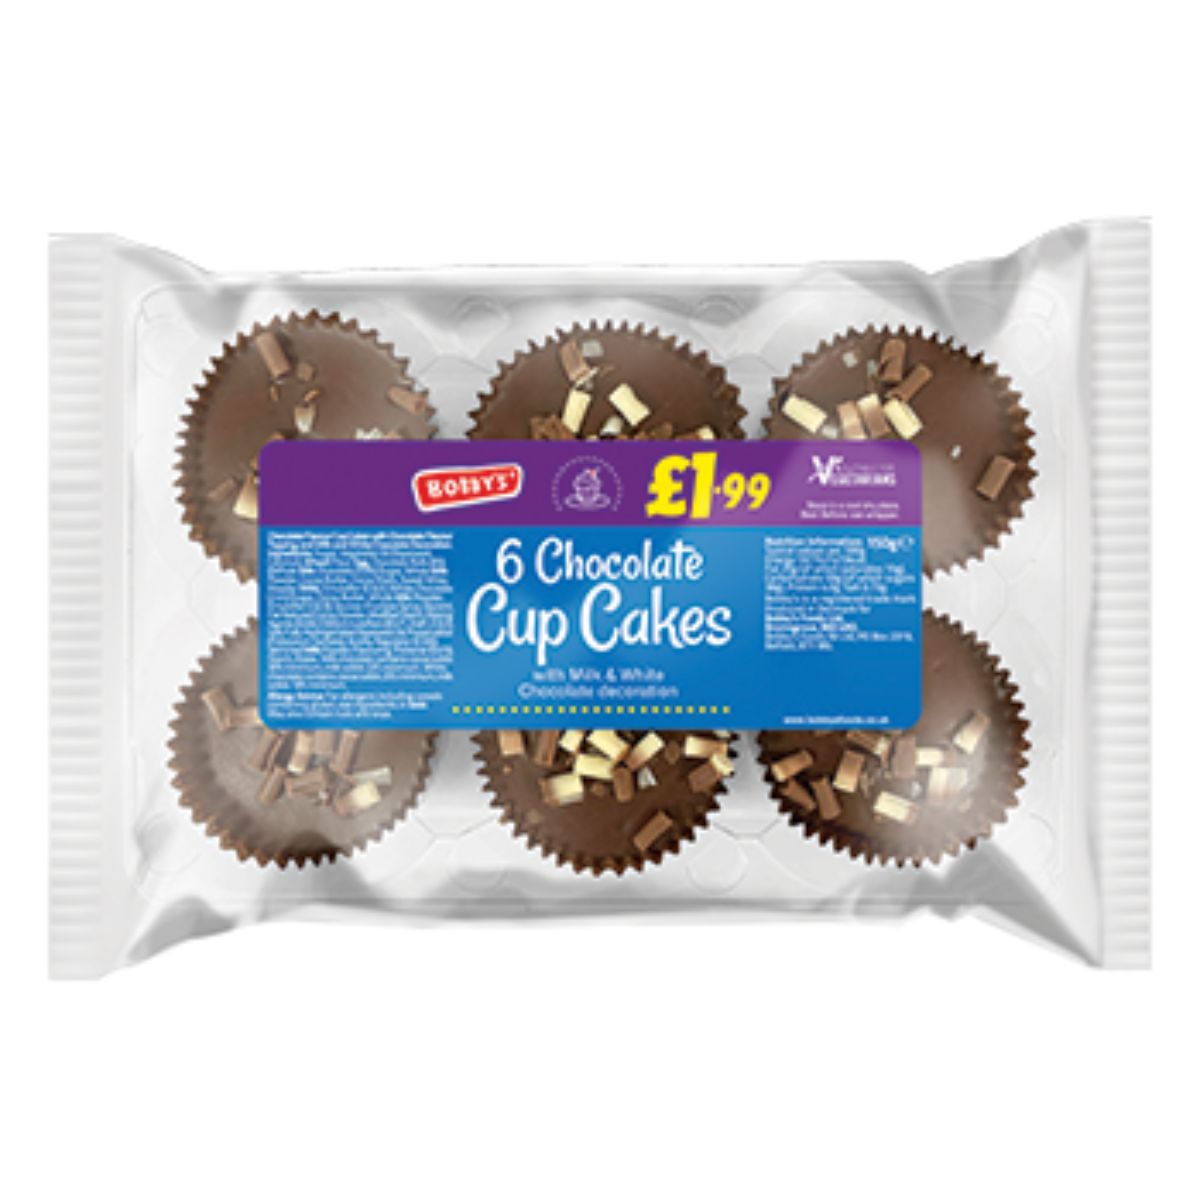 A packaged Bobbys - Chocolate Cup Cake - 6pcs displaying six chocolate cupcakes with a price label of £1.99.